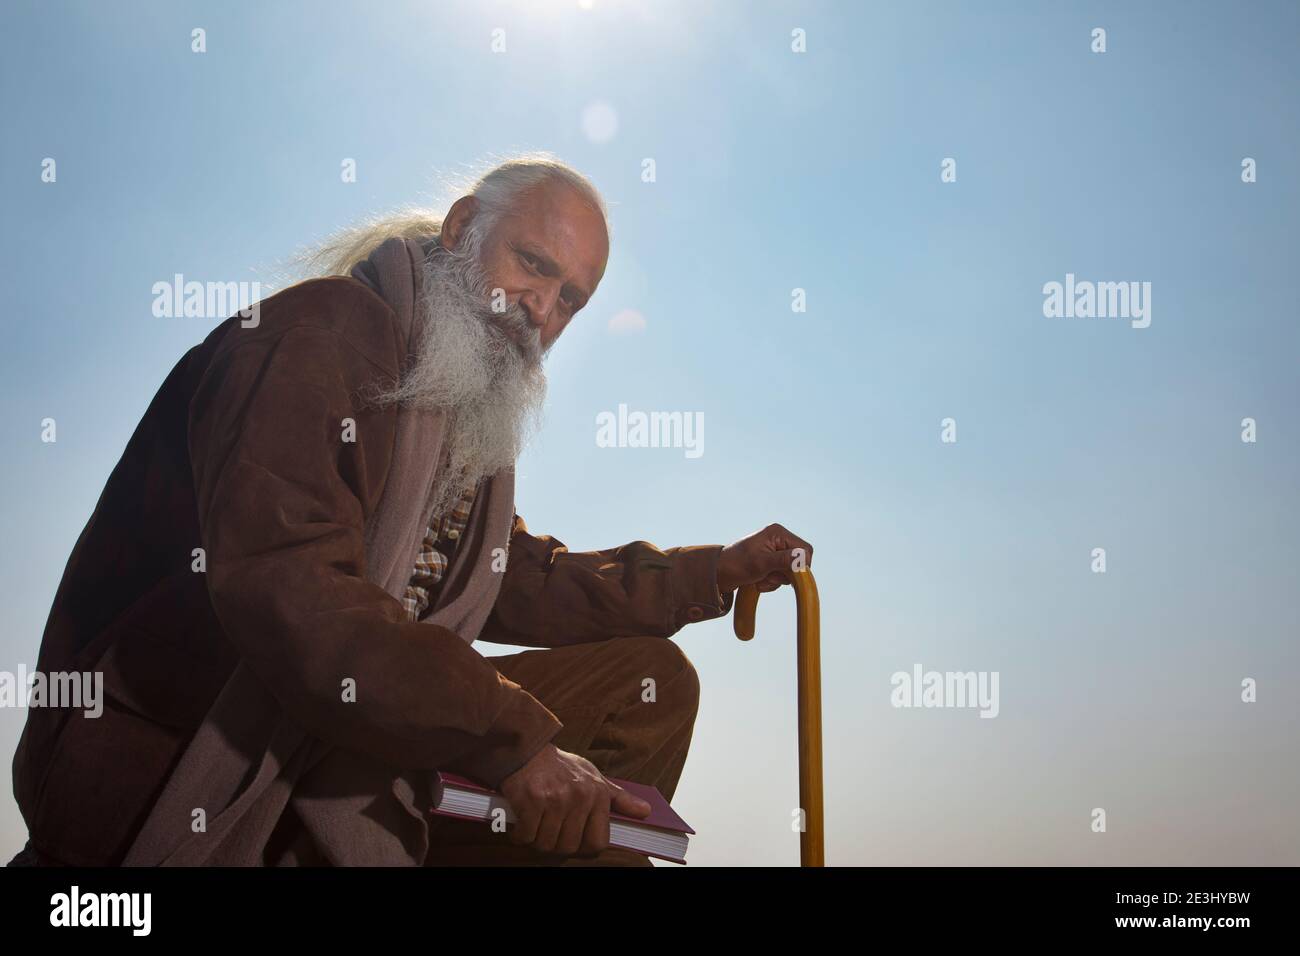 A BEARDED OLD MAN SITTING WITH SUPPORT OF STICK HOLDING A BOOK Stock Photo